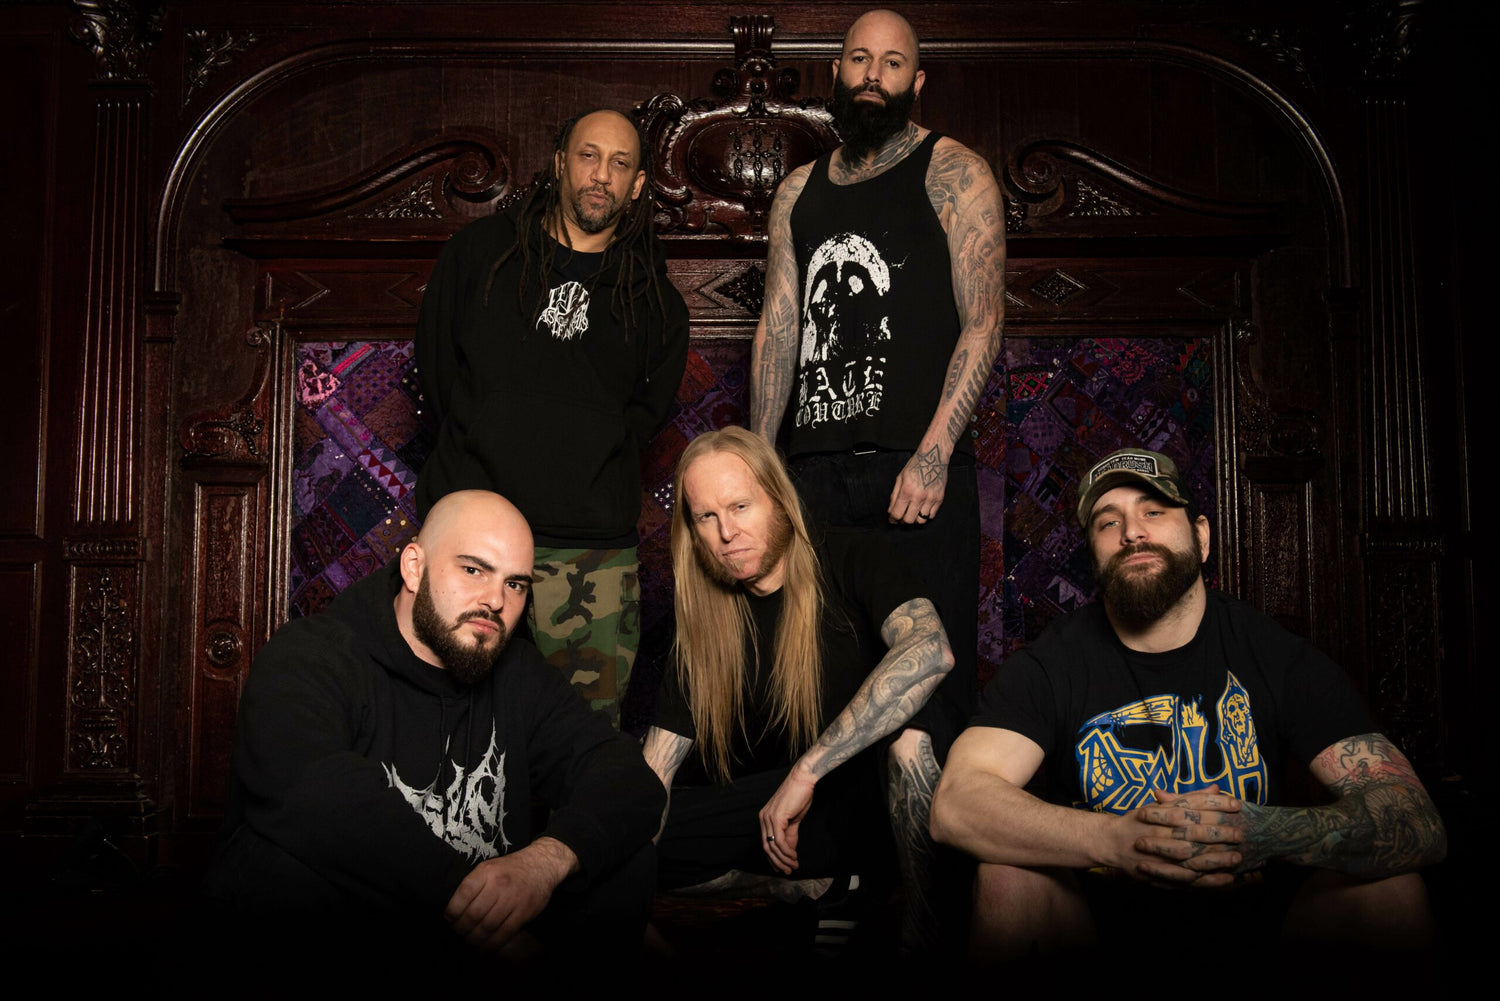 SUFFOCATION ANNOUNCE NINTH FULL LENGTH ALBUM, ‘HYMNS FROM THE APOCRYPHA’